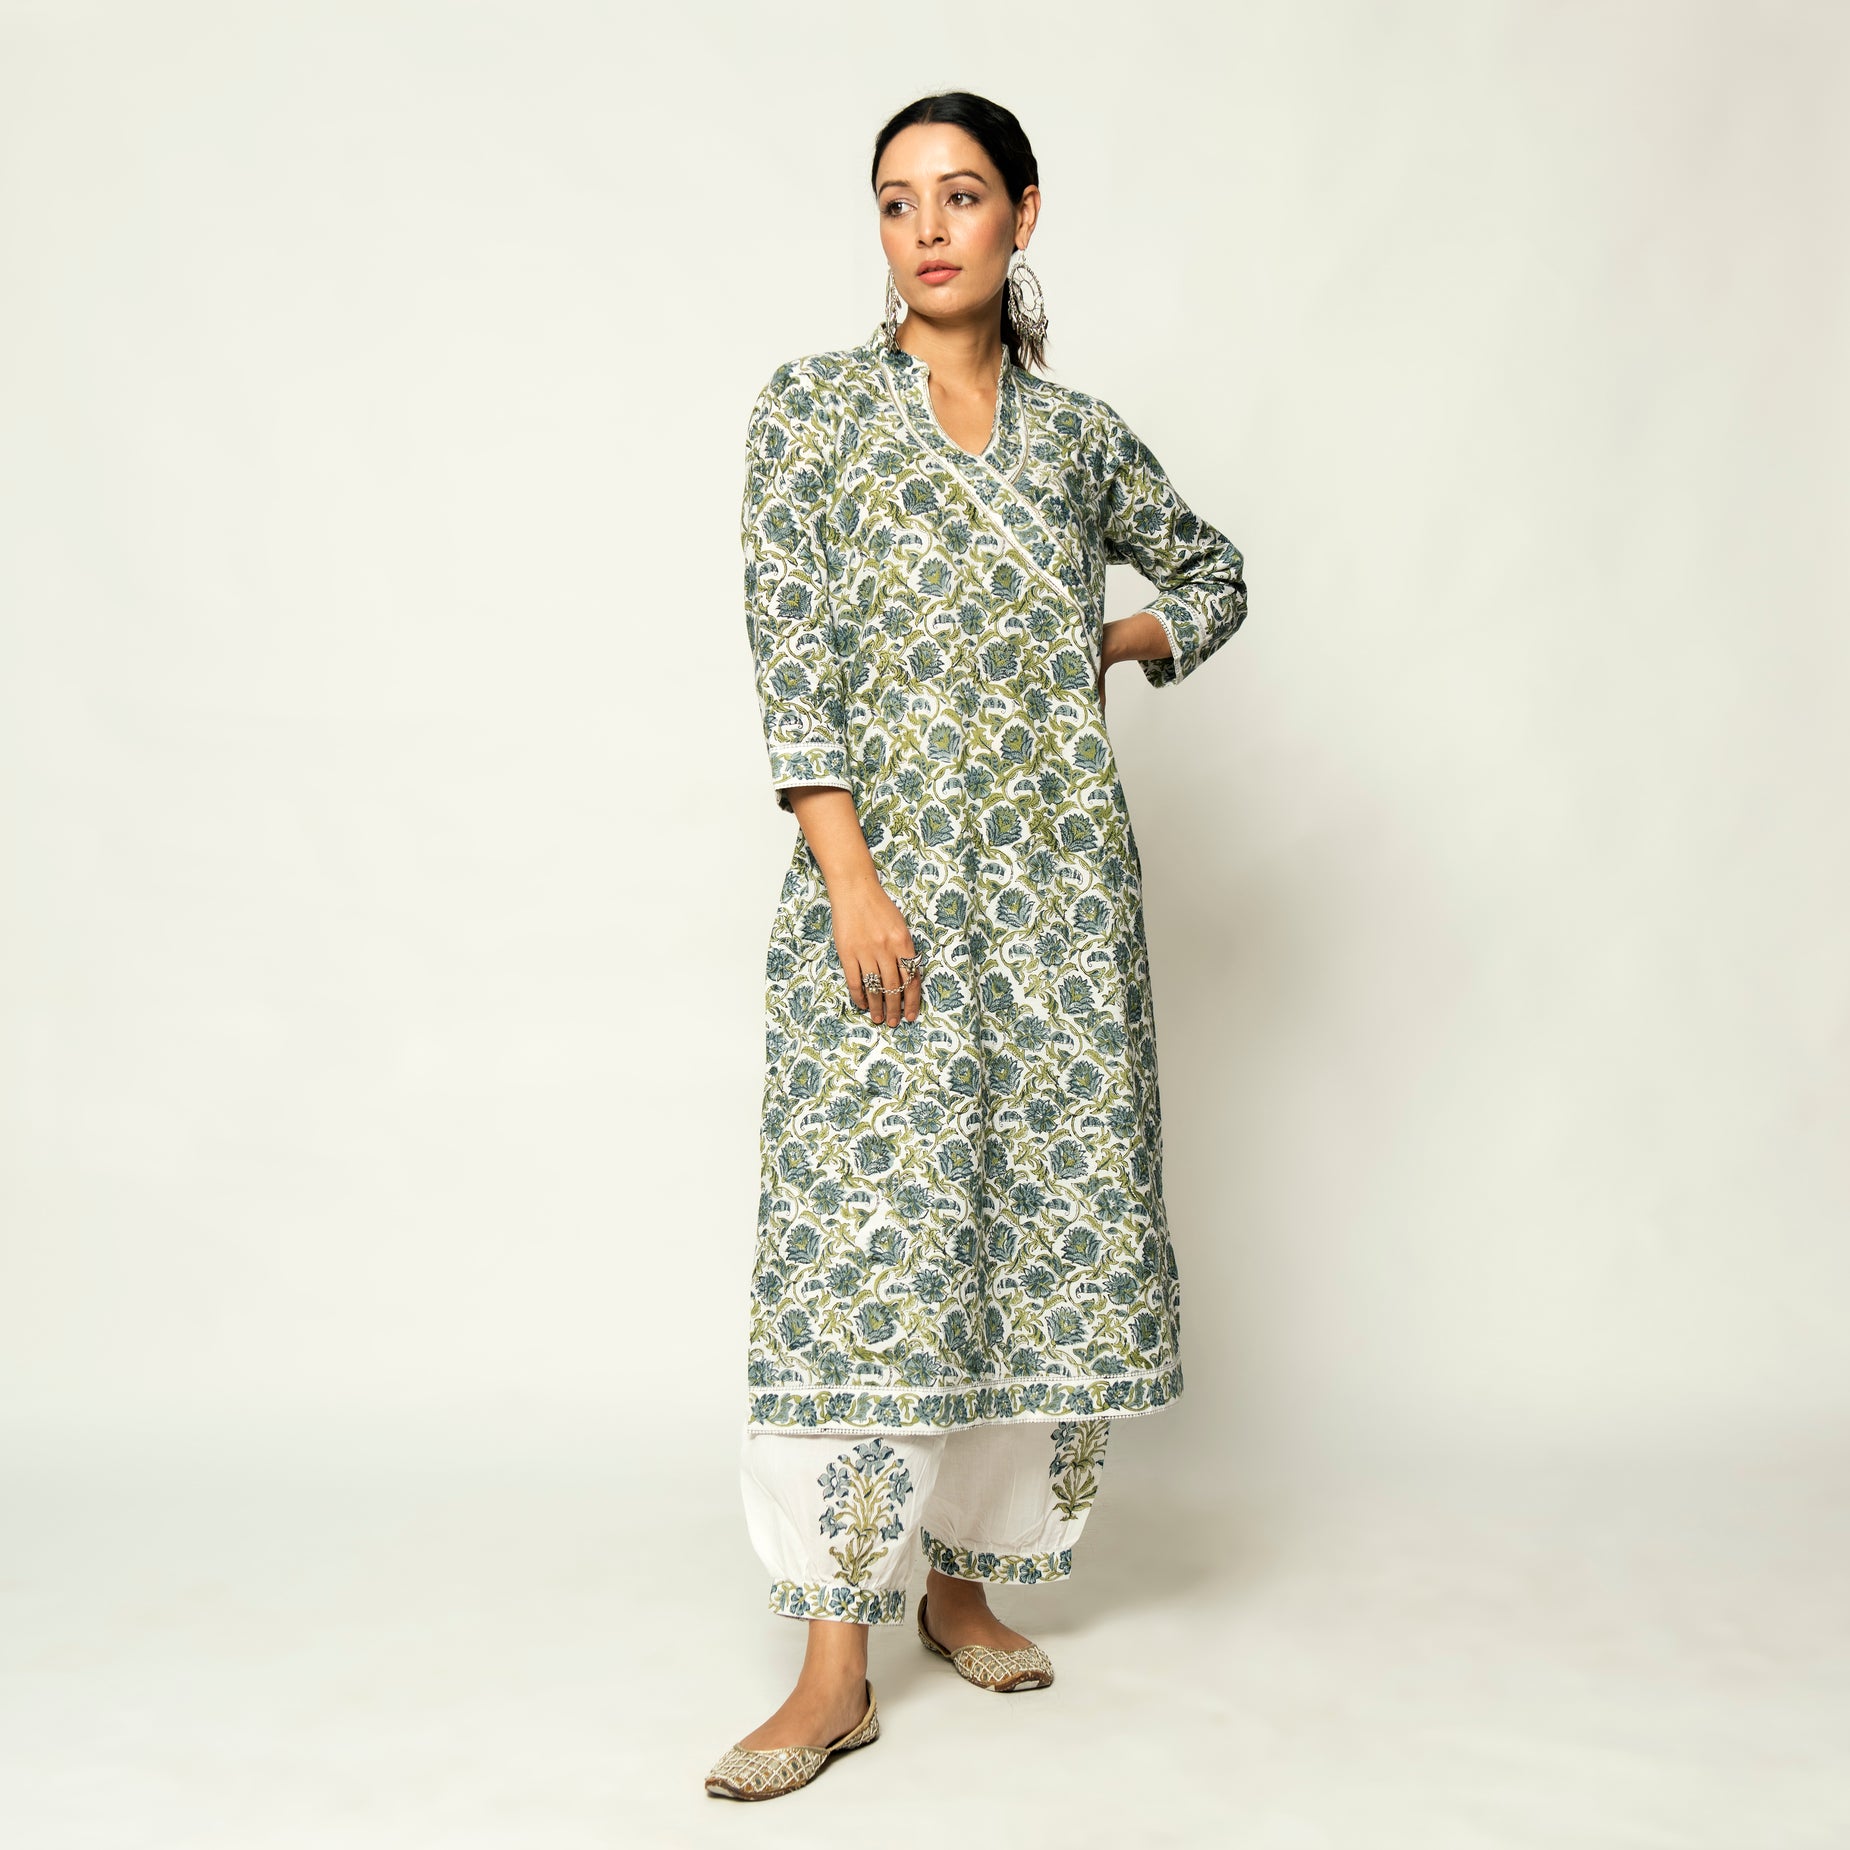 Chacha's Clothing – Chacha's - Indian ethnic wear since 1957.